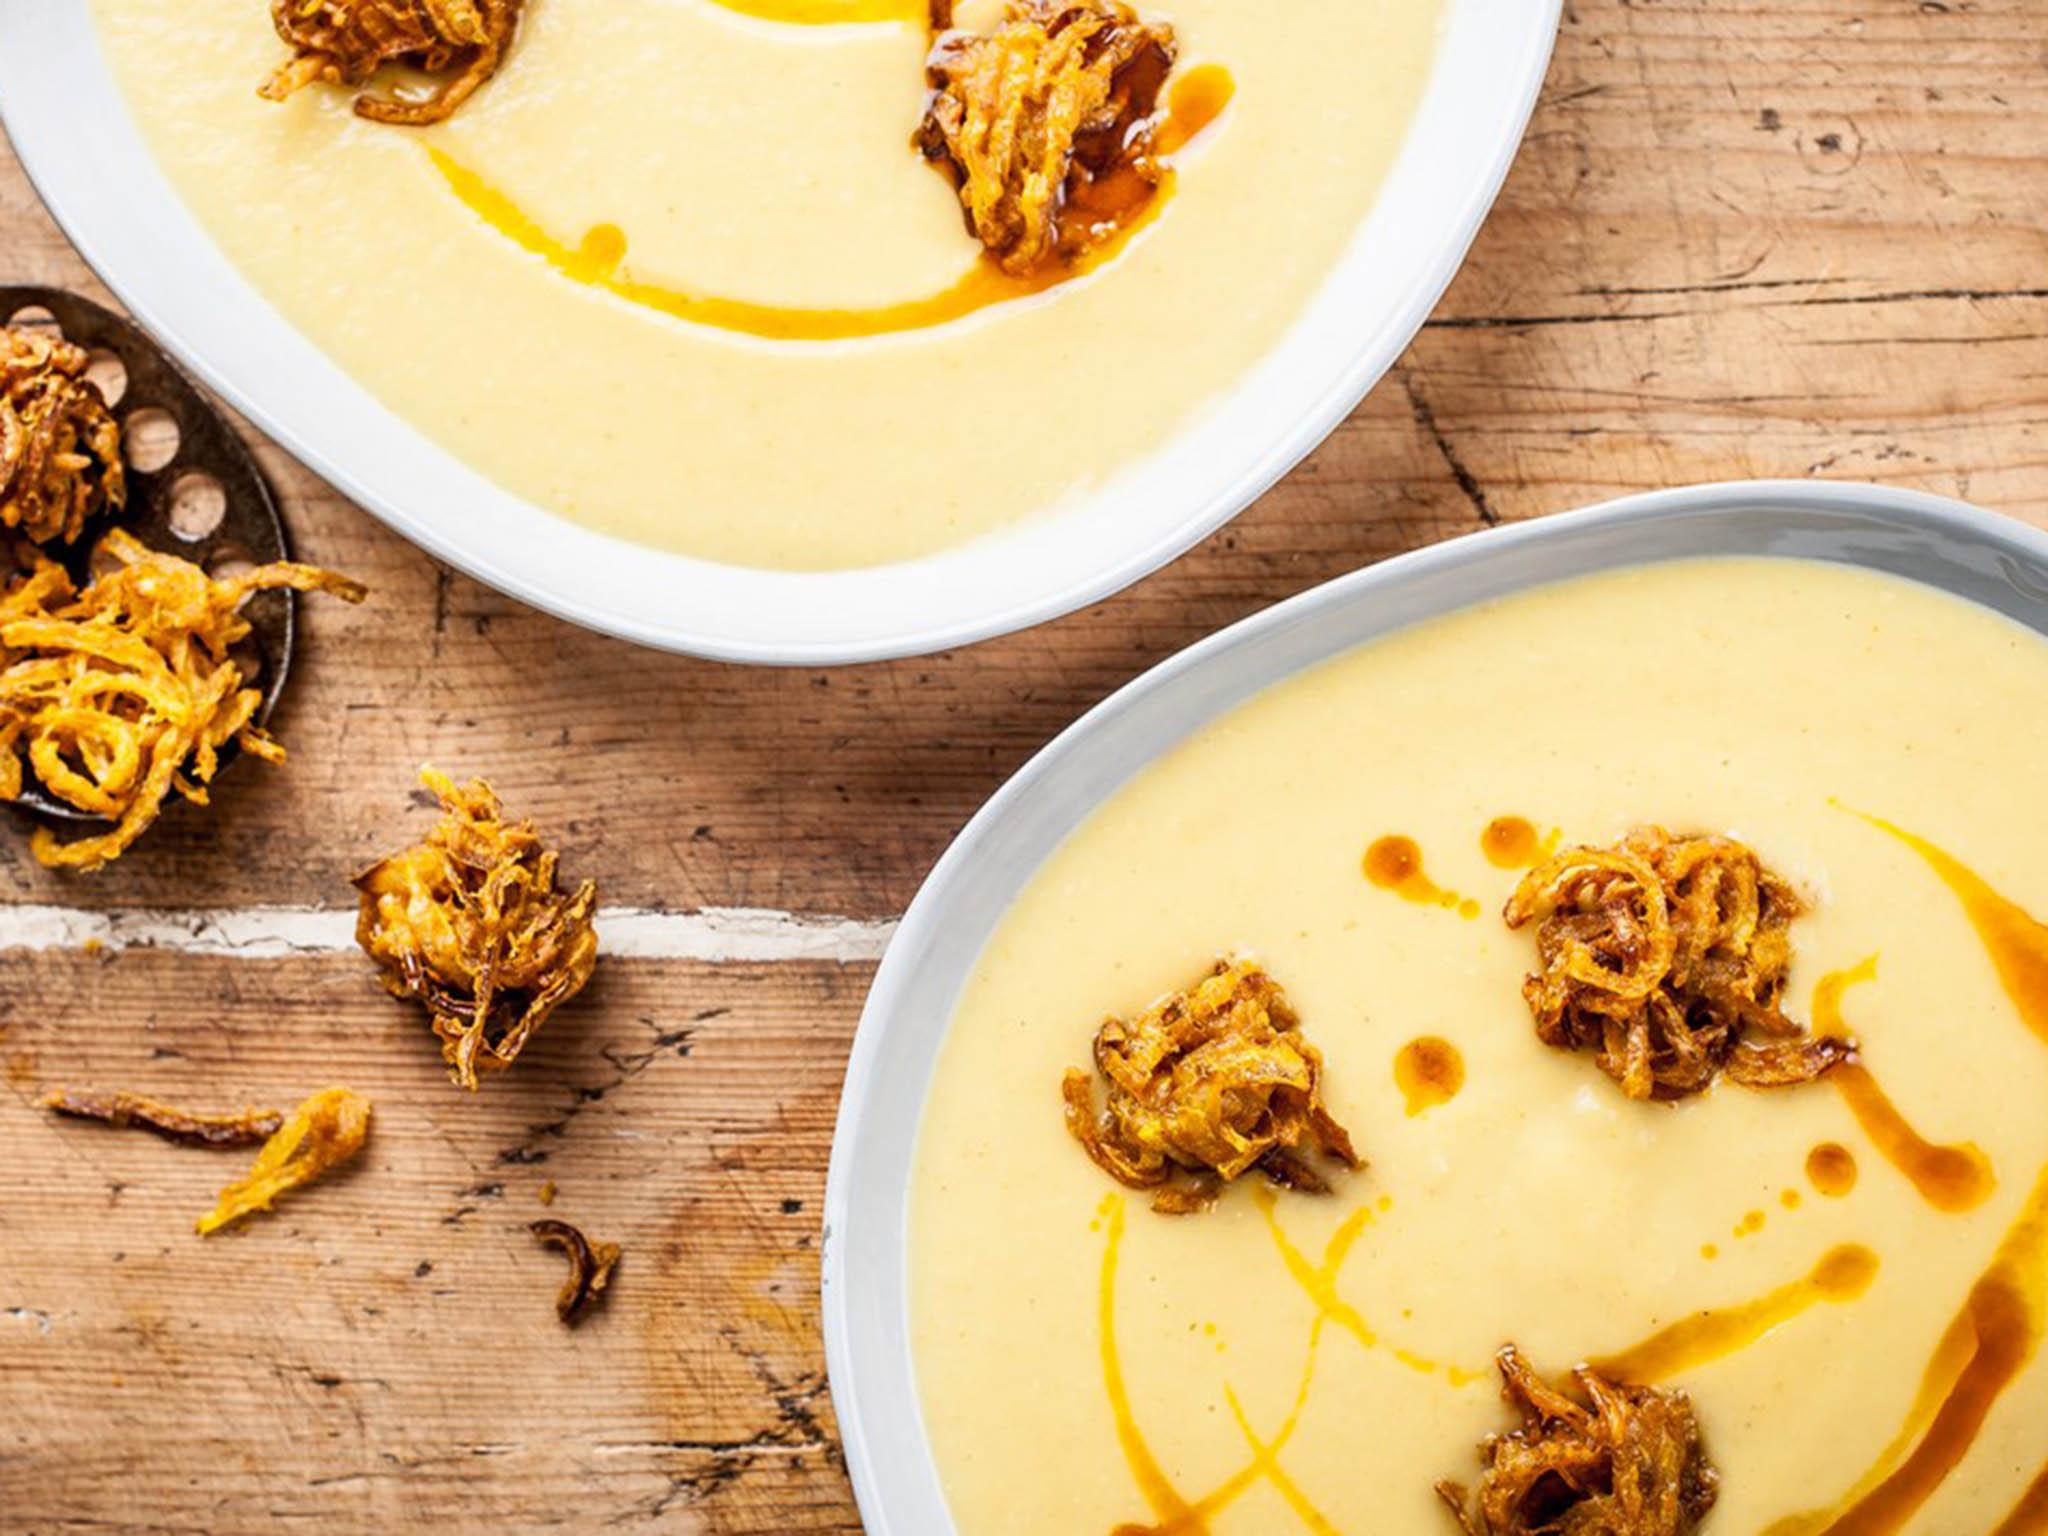 Curried parsnip soup with pear is enlivened by the addition of onion bhajis